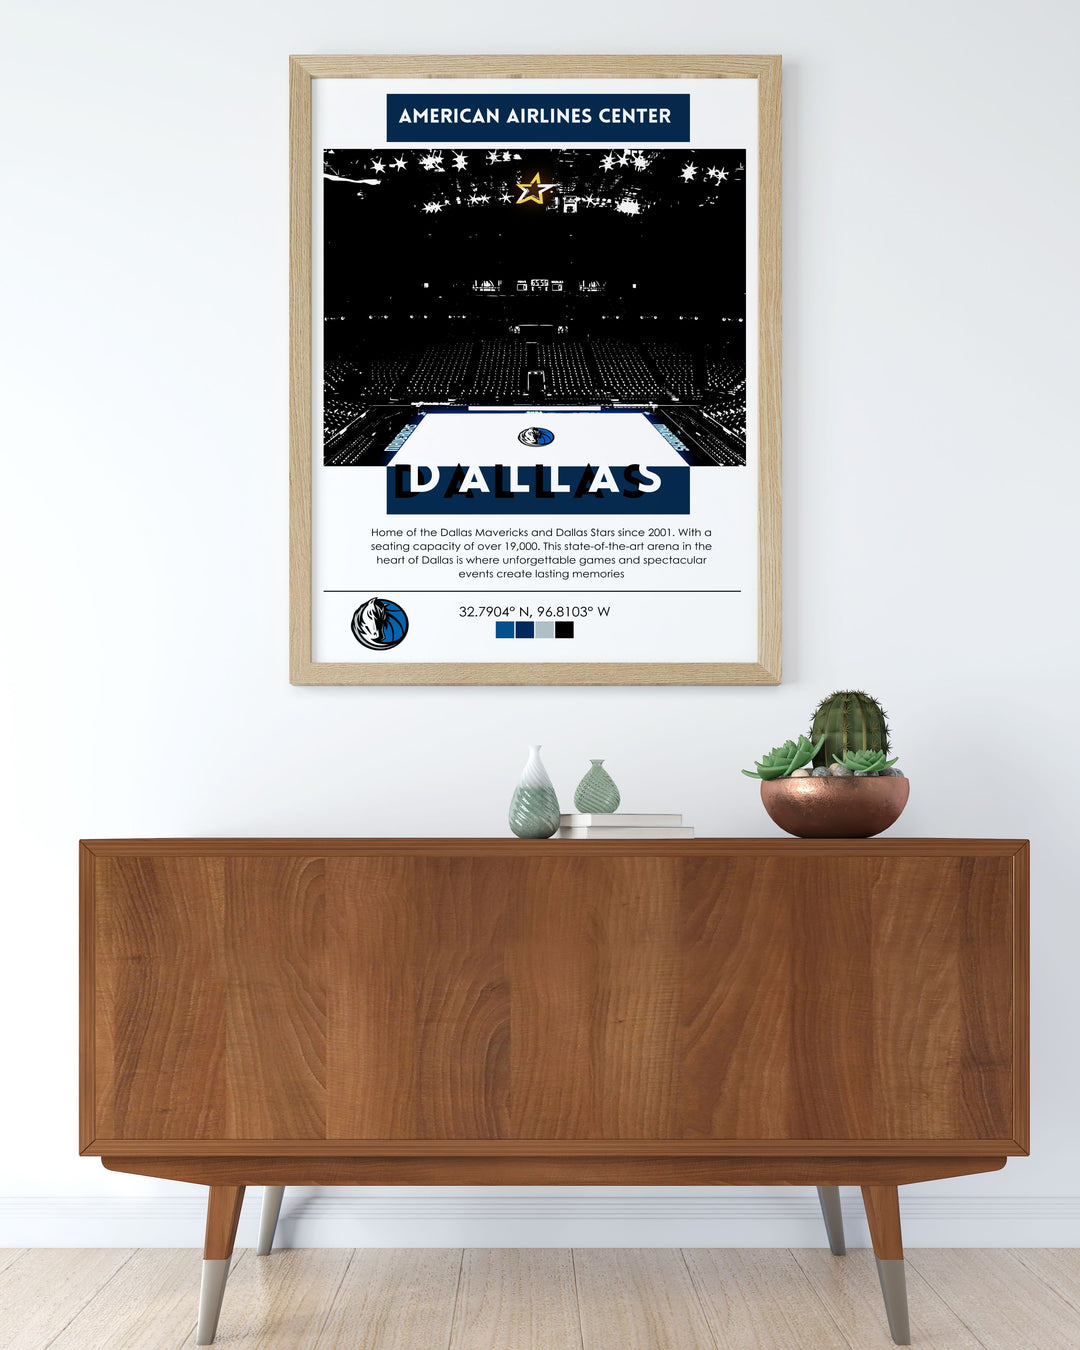 Celebrate your love for sports with our Texas Rangers Print Cowboys Print and Dallas Stars Print showcasing the iconic American Airlines Center. These posters make exceptional Fathers Day Gifts and are perfect for any sports fan looking to decorate their space.